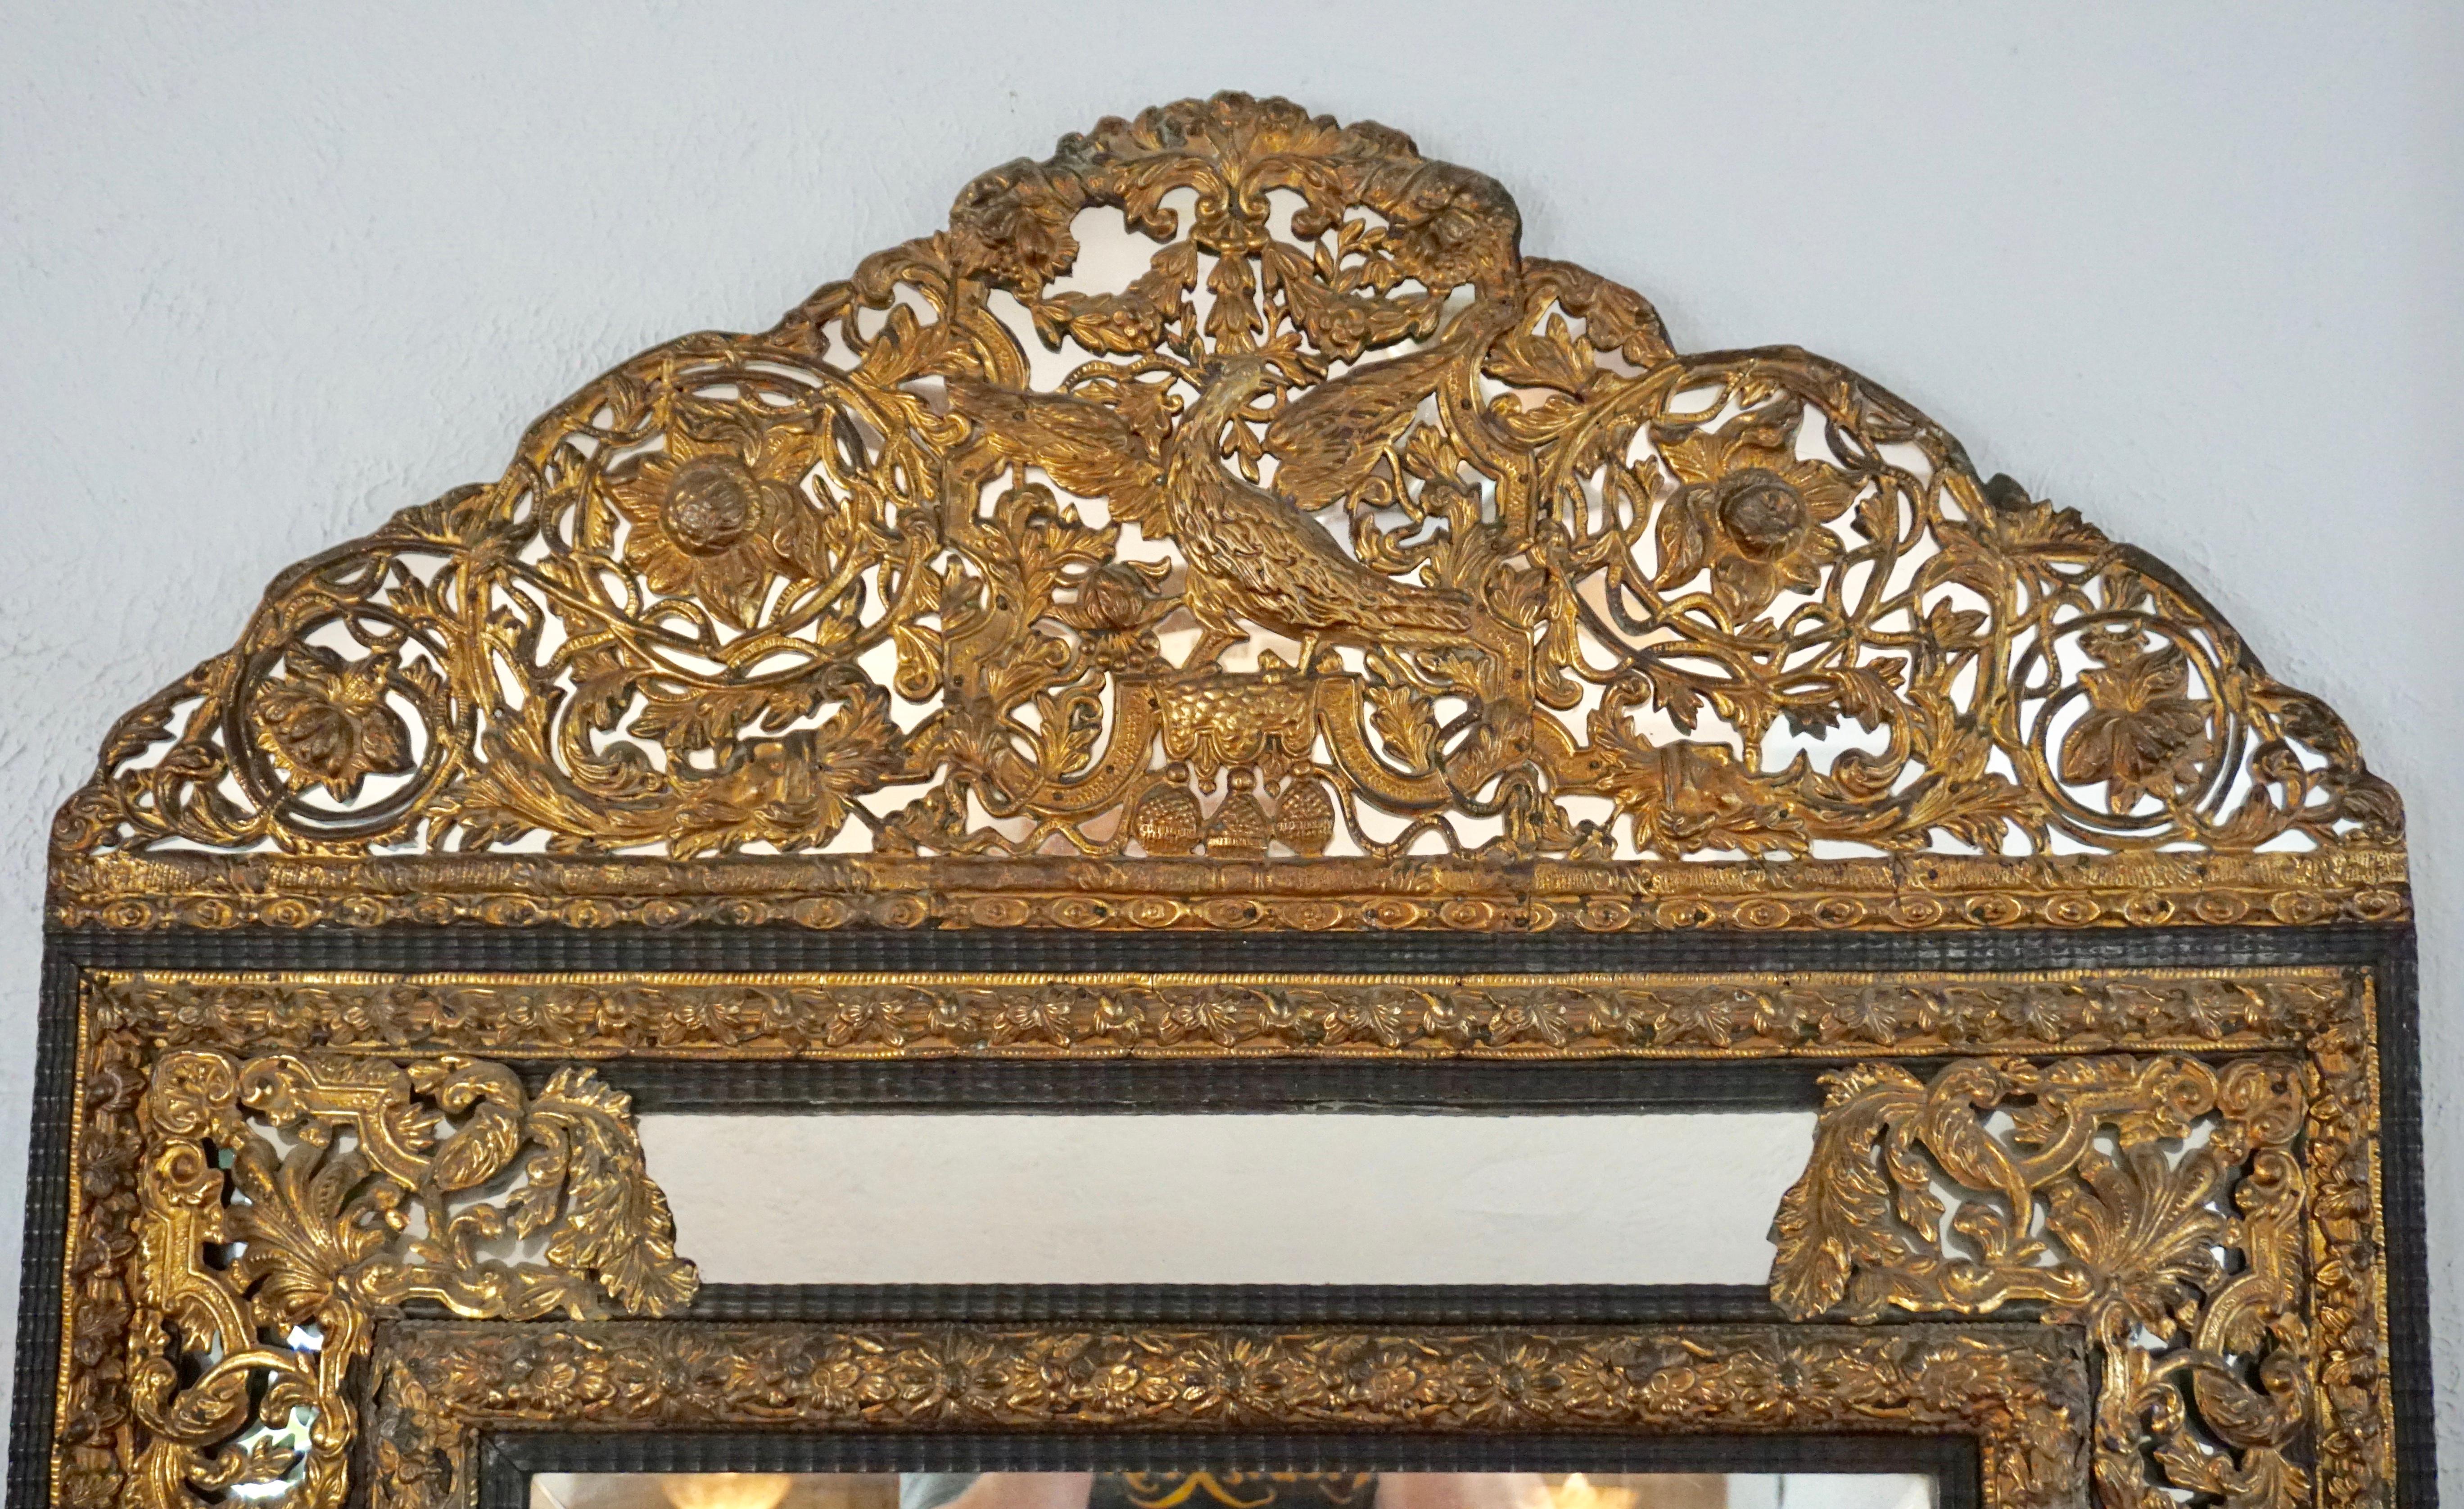 A stunning gilt metal repousse and ebony carved wood Baroque style Cusion mirror from the estate of Lois and Buzz Aldrin (Moon landing Astronaut). This is a large and heavy solid wood and glass mirror (replaced modern mirrors) with exquisite